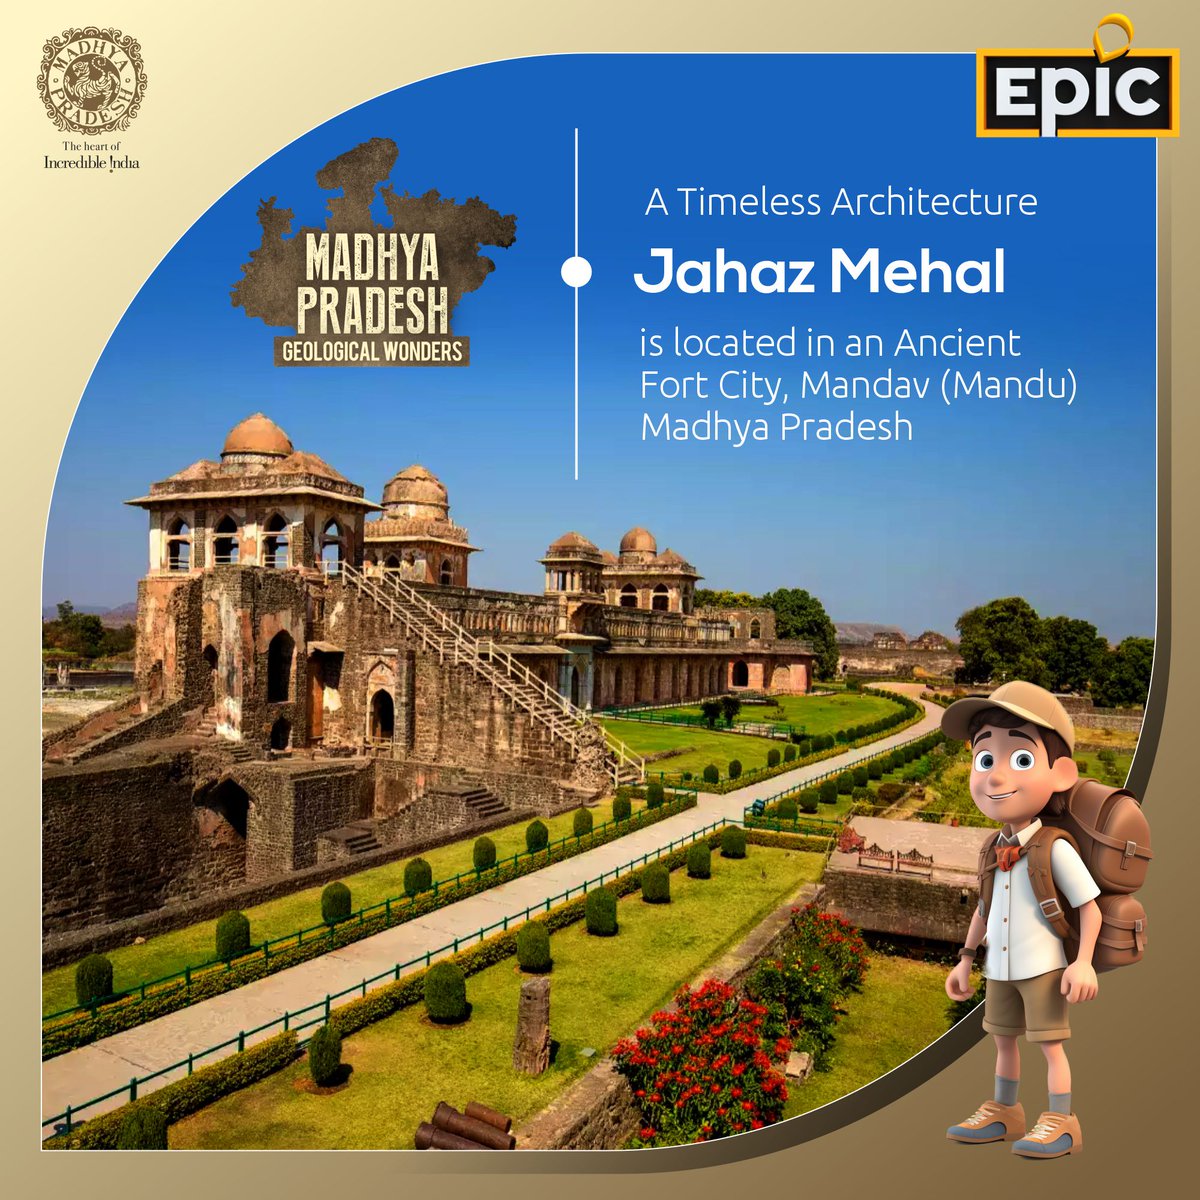 Jahaz Mahal in Madhya Pradesh is a historical monument located in Mandu. It was built during the medieval period and is known for its unique ship-like structure. 🏰 It is a popular tourist attraction, showcasing the rich architectural heritage of India. #JahazMahal #MadhyaPradesh